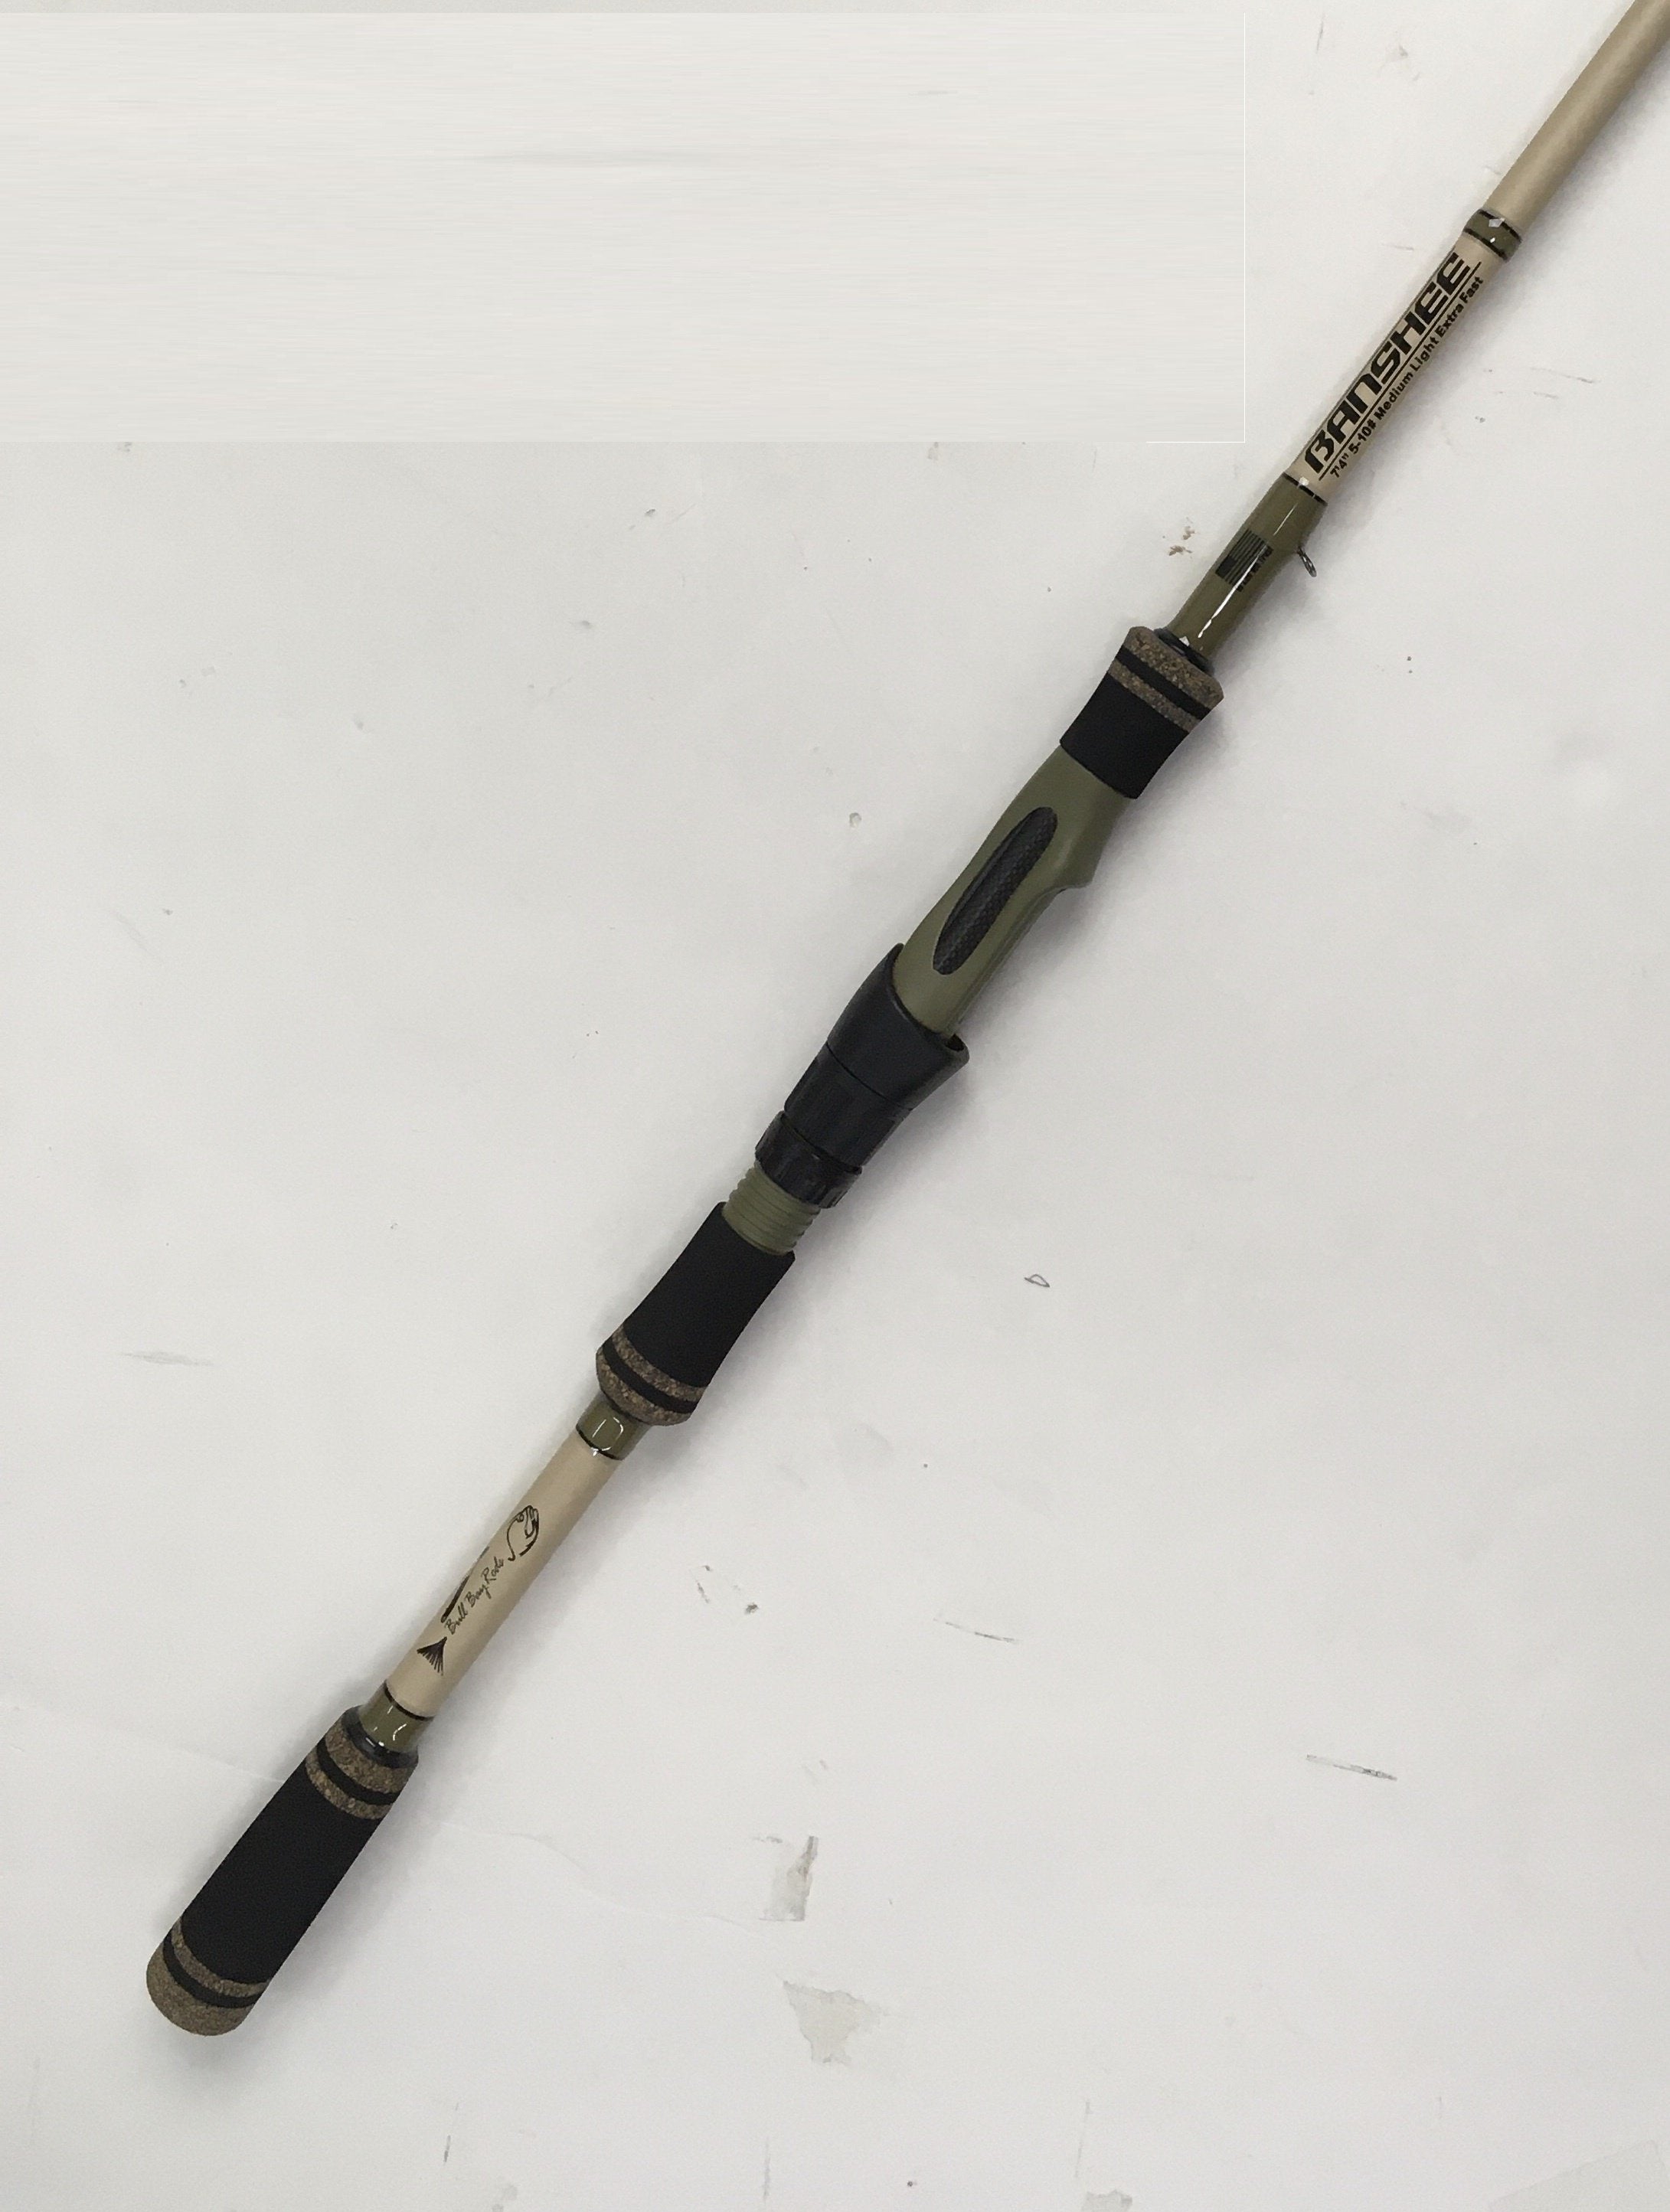 13 Fishing Fate Green - 7'6 M Inshore Casting Rod - Andy Thornal